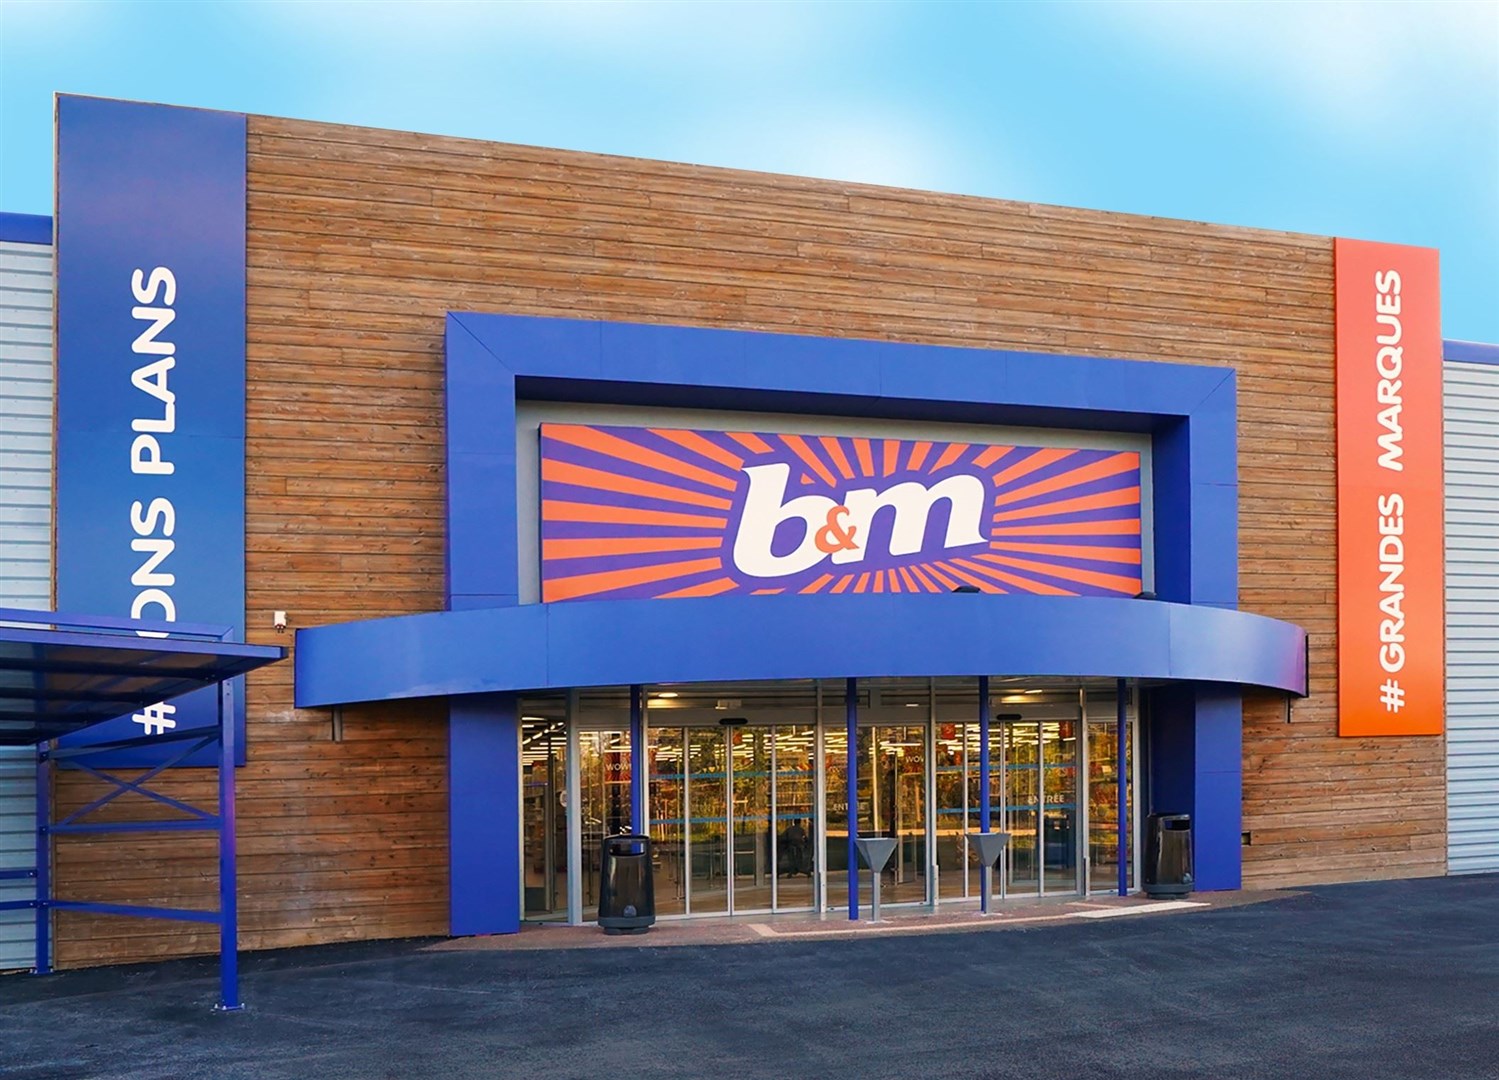 B&M said on Tuesday it will buy up to 51 Wilko shops (B&M/PA)